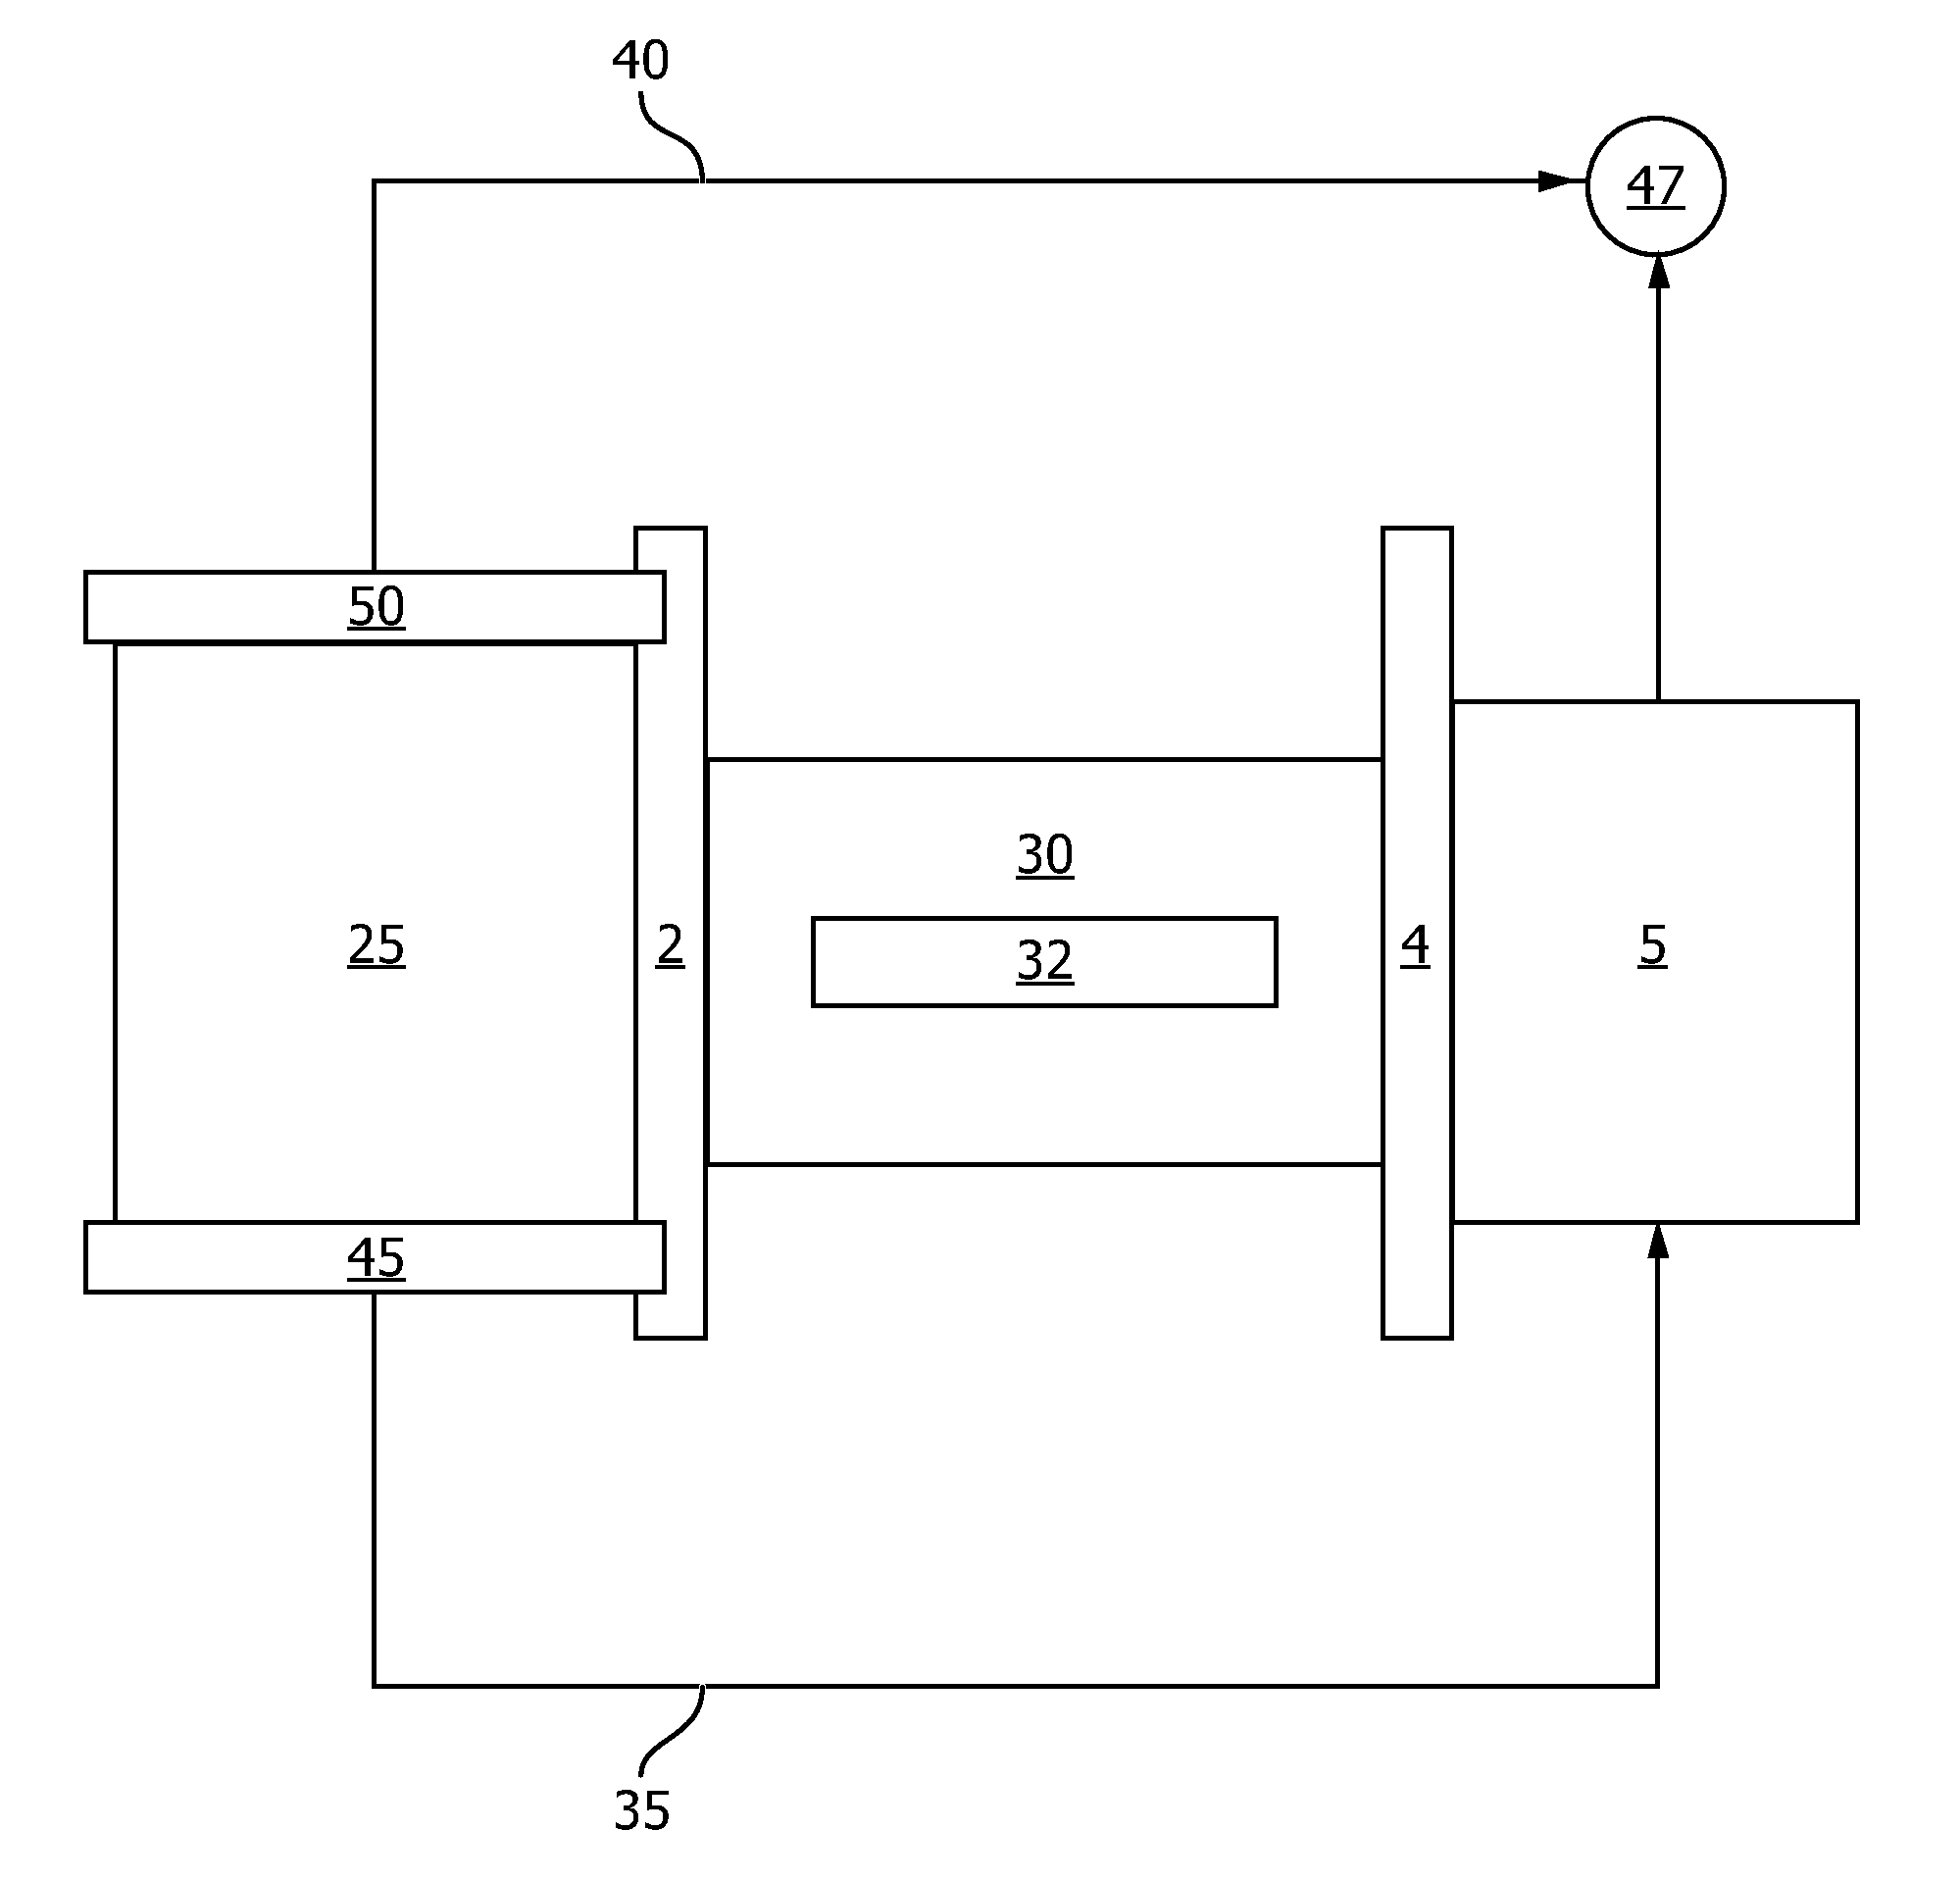 Method for generating nitric oxide